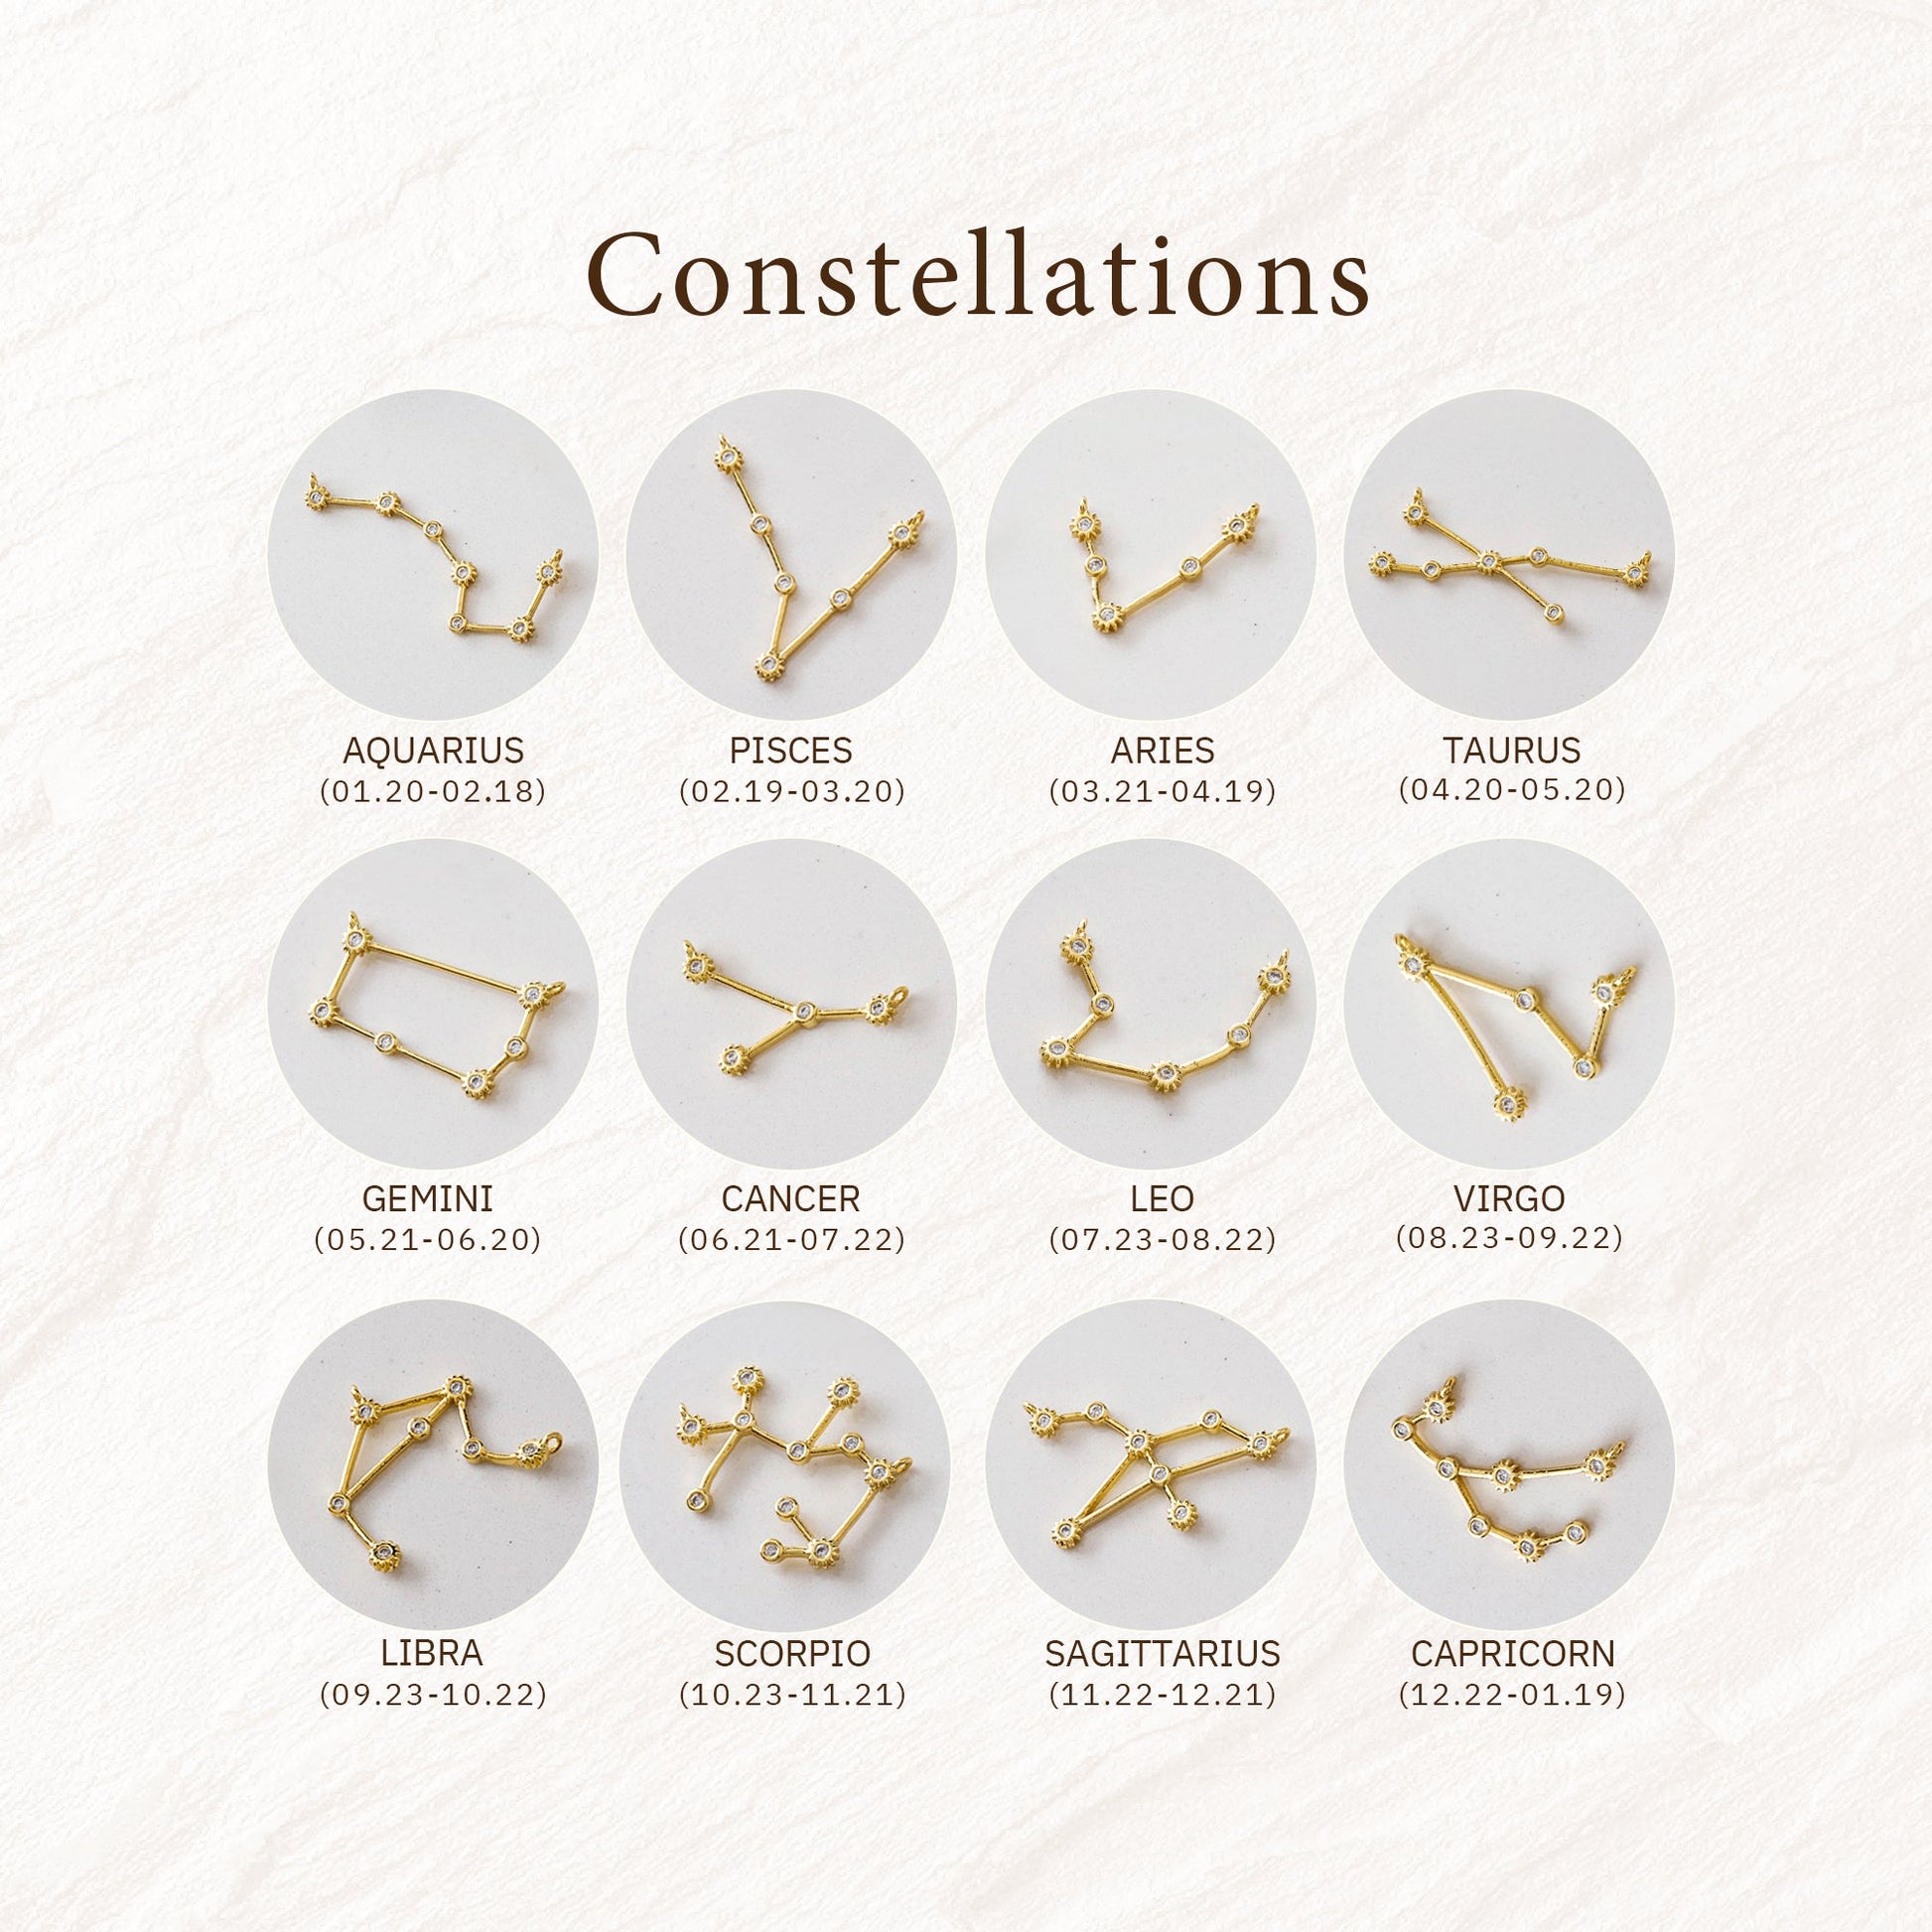 The showcase photos of 12 constellations